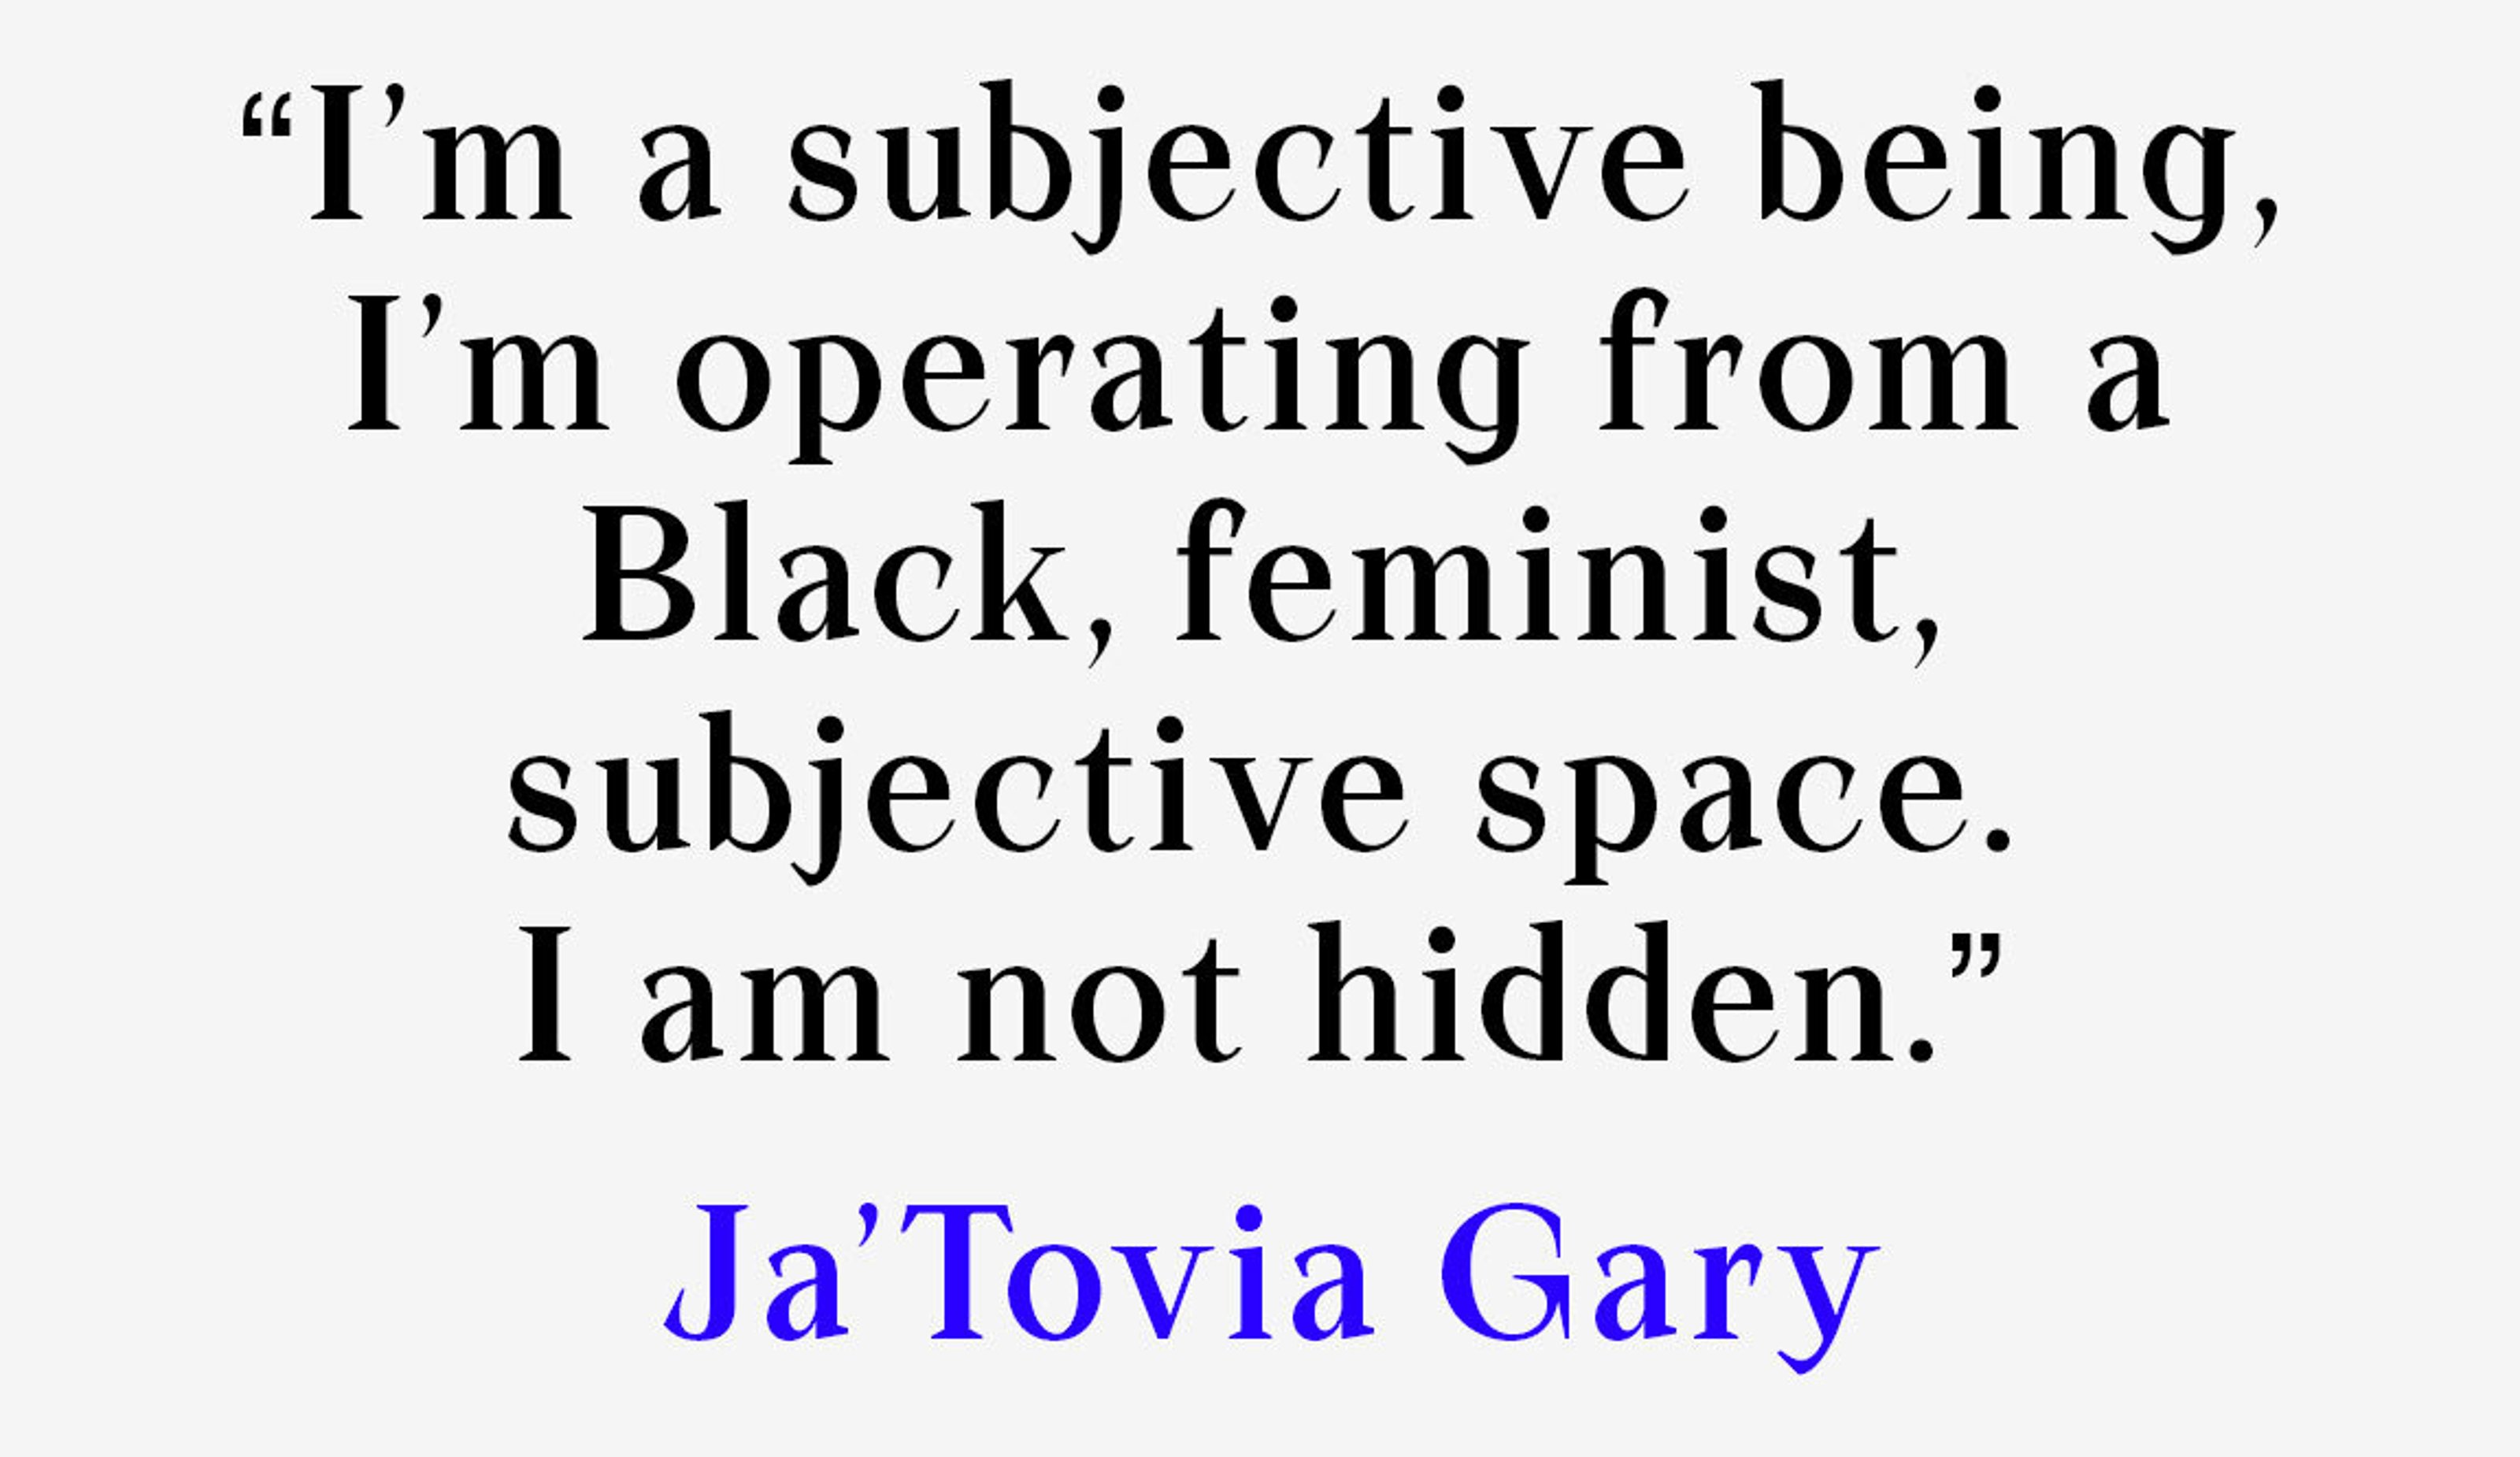 “I’m a subjective being, I’m operating from a Black, feminist, subjective space. I am not hidden.”